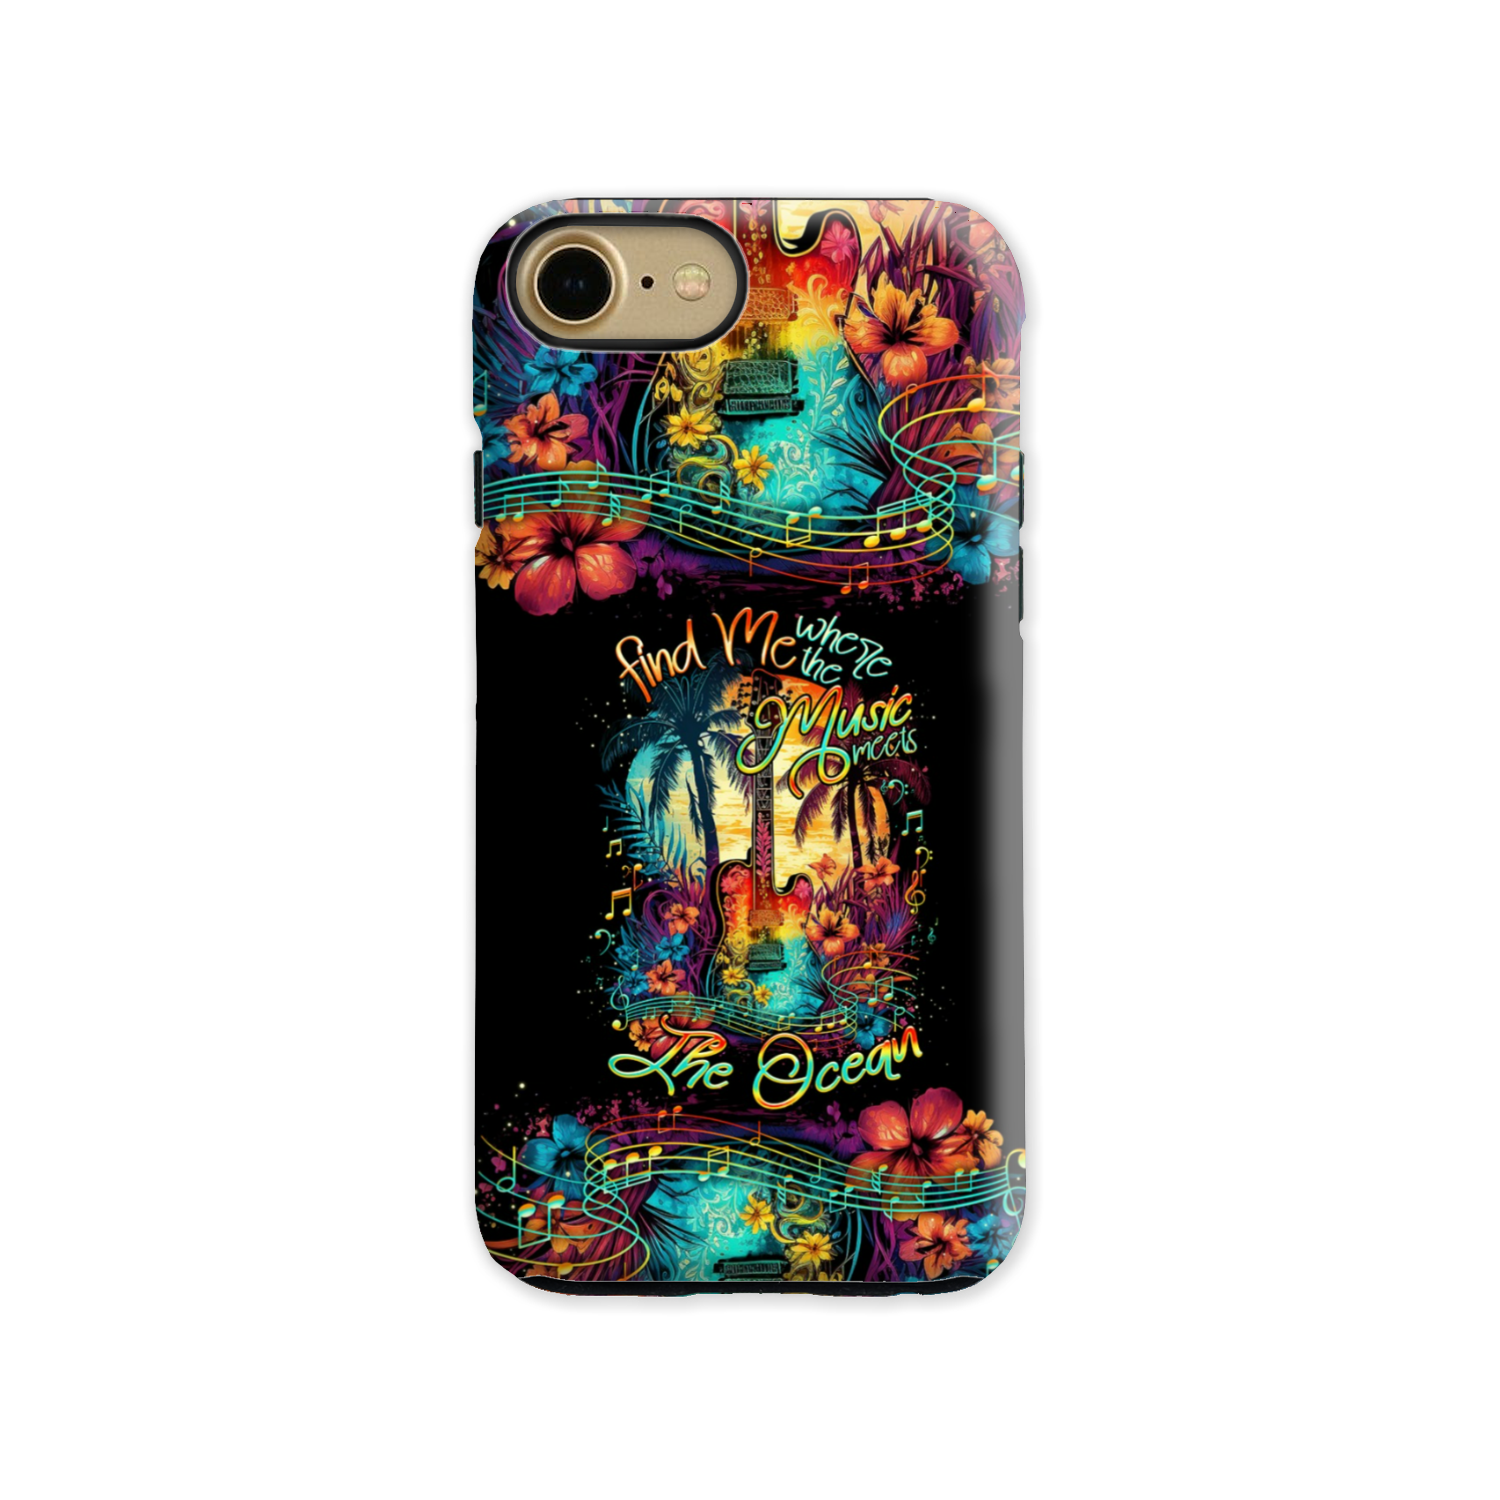 FIND ME WHERE THE MUSIC MEETS THE OCEAN GUITAR PHONE CASE - TLNO1305231